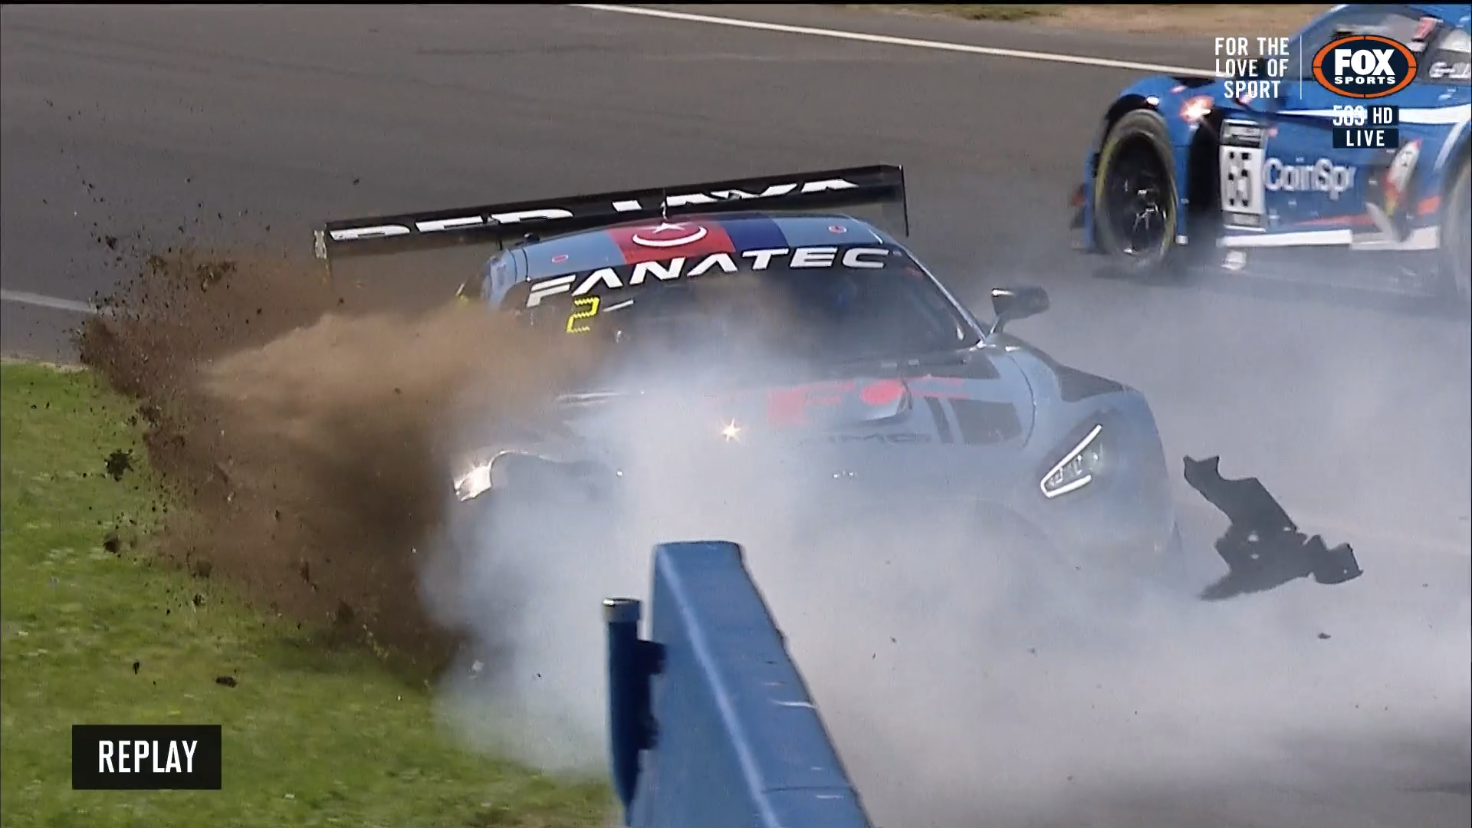 Bathurst 1000 leadup marred by huge crash for third straight day